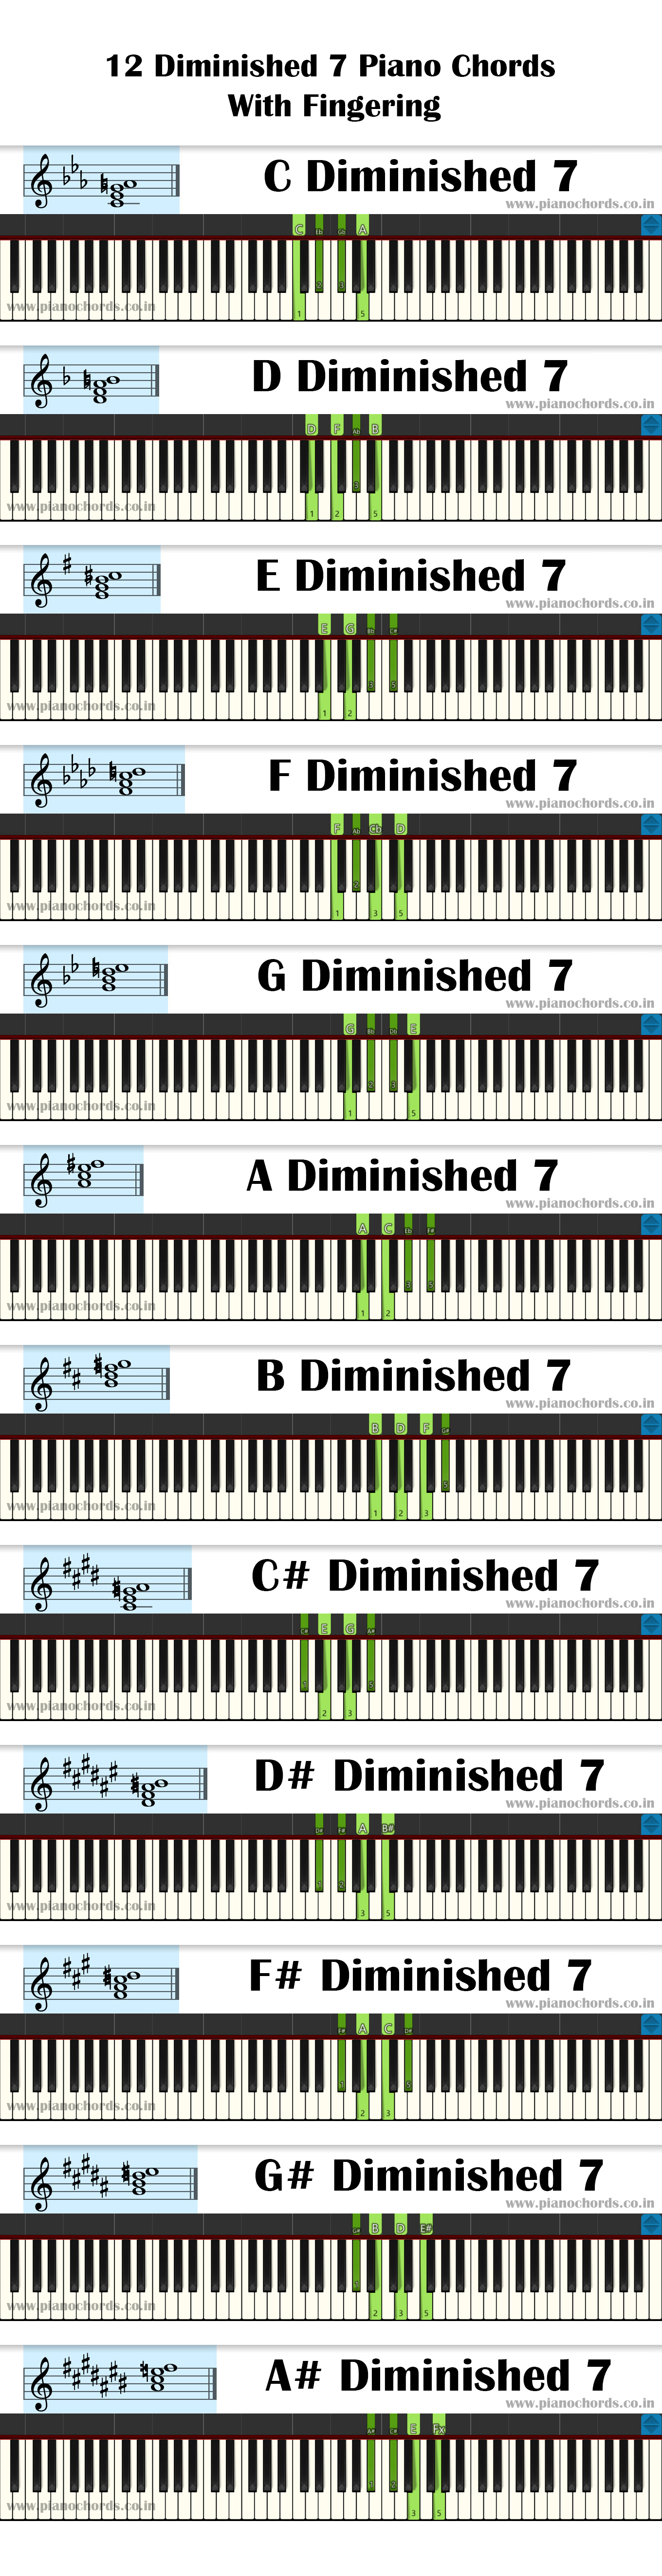 guitar chords to piano